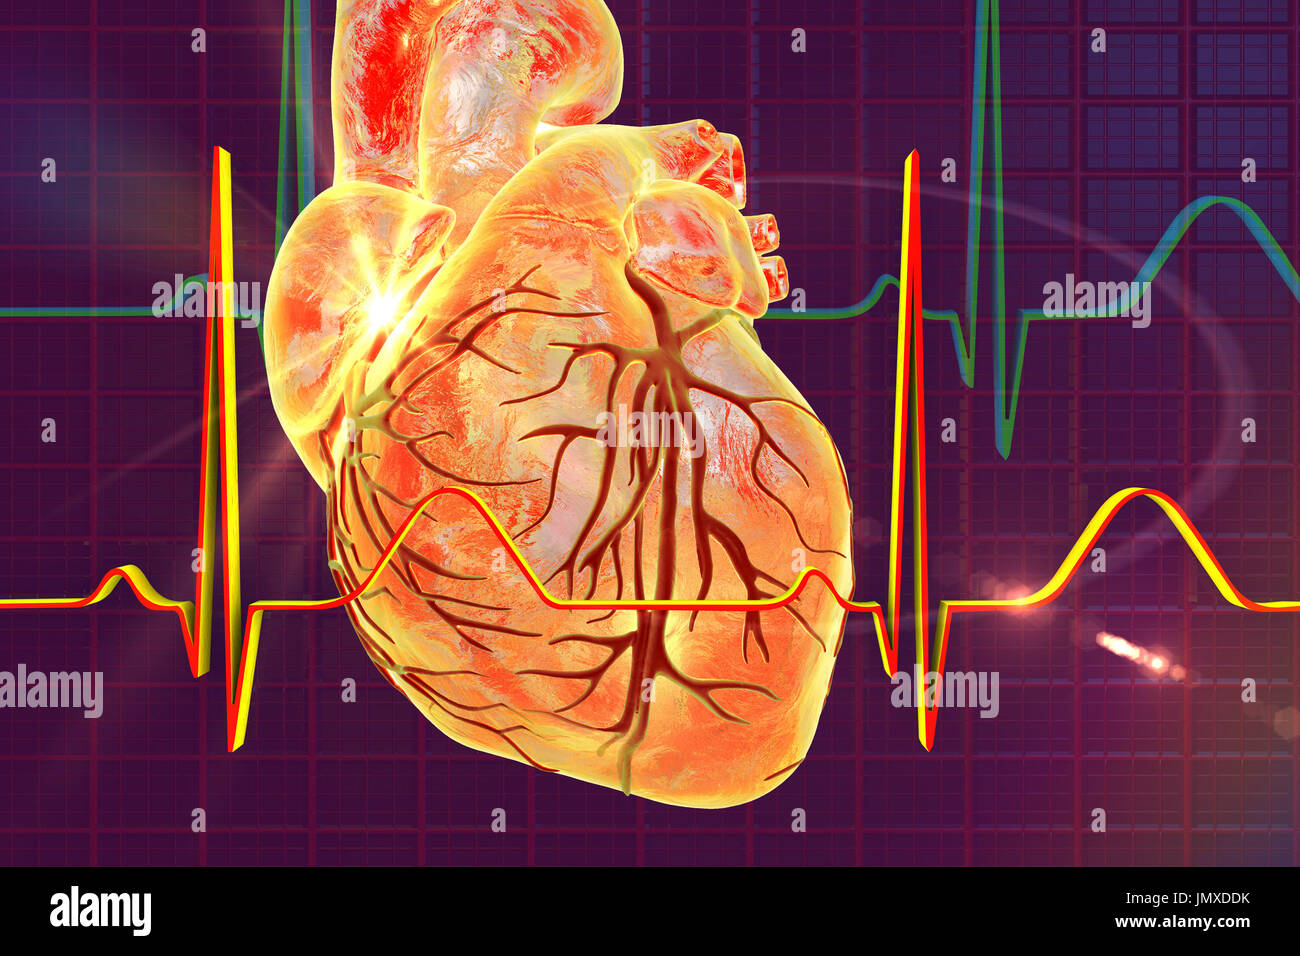 Illustration showing a heart overlaid with a normal electrocardiogram (ECG). Stock Photo